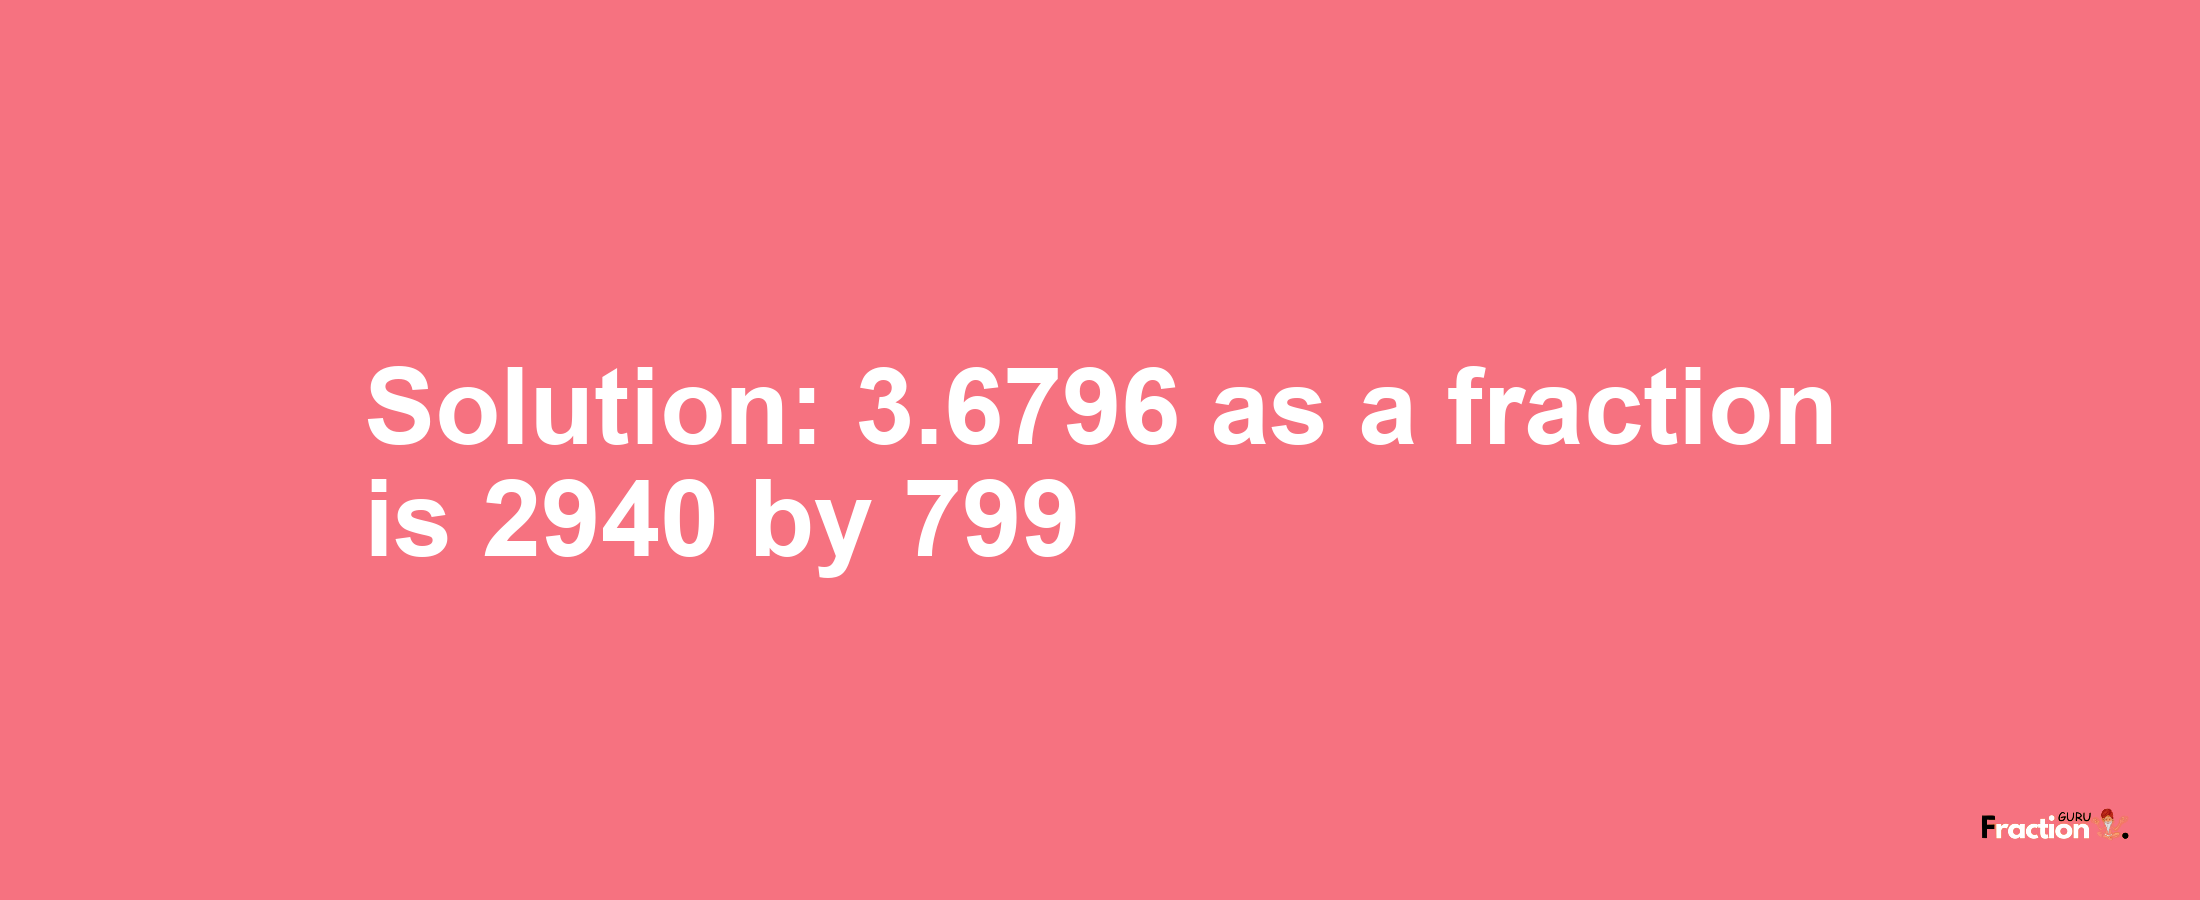 Solution:3.6796 as a fraction is 2940/799